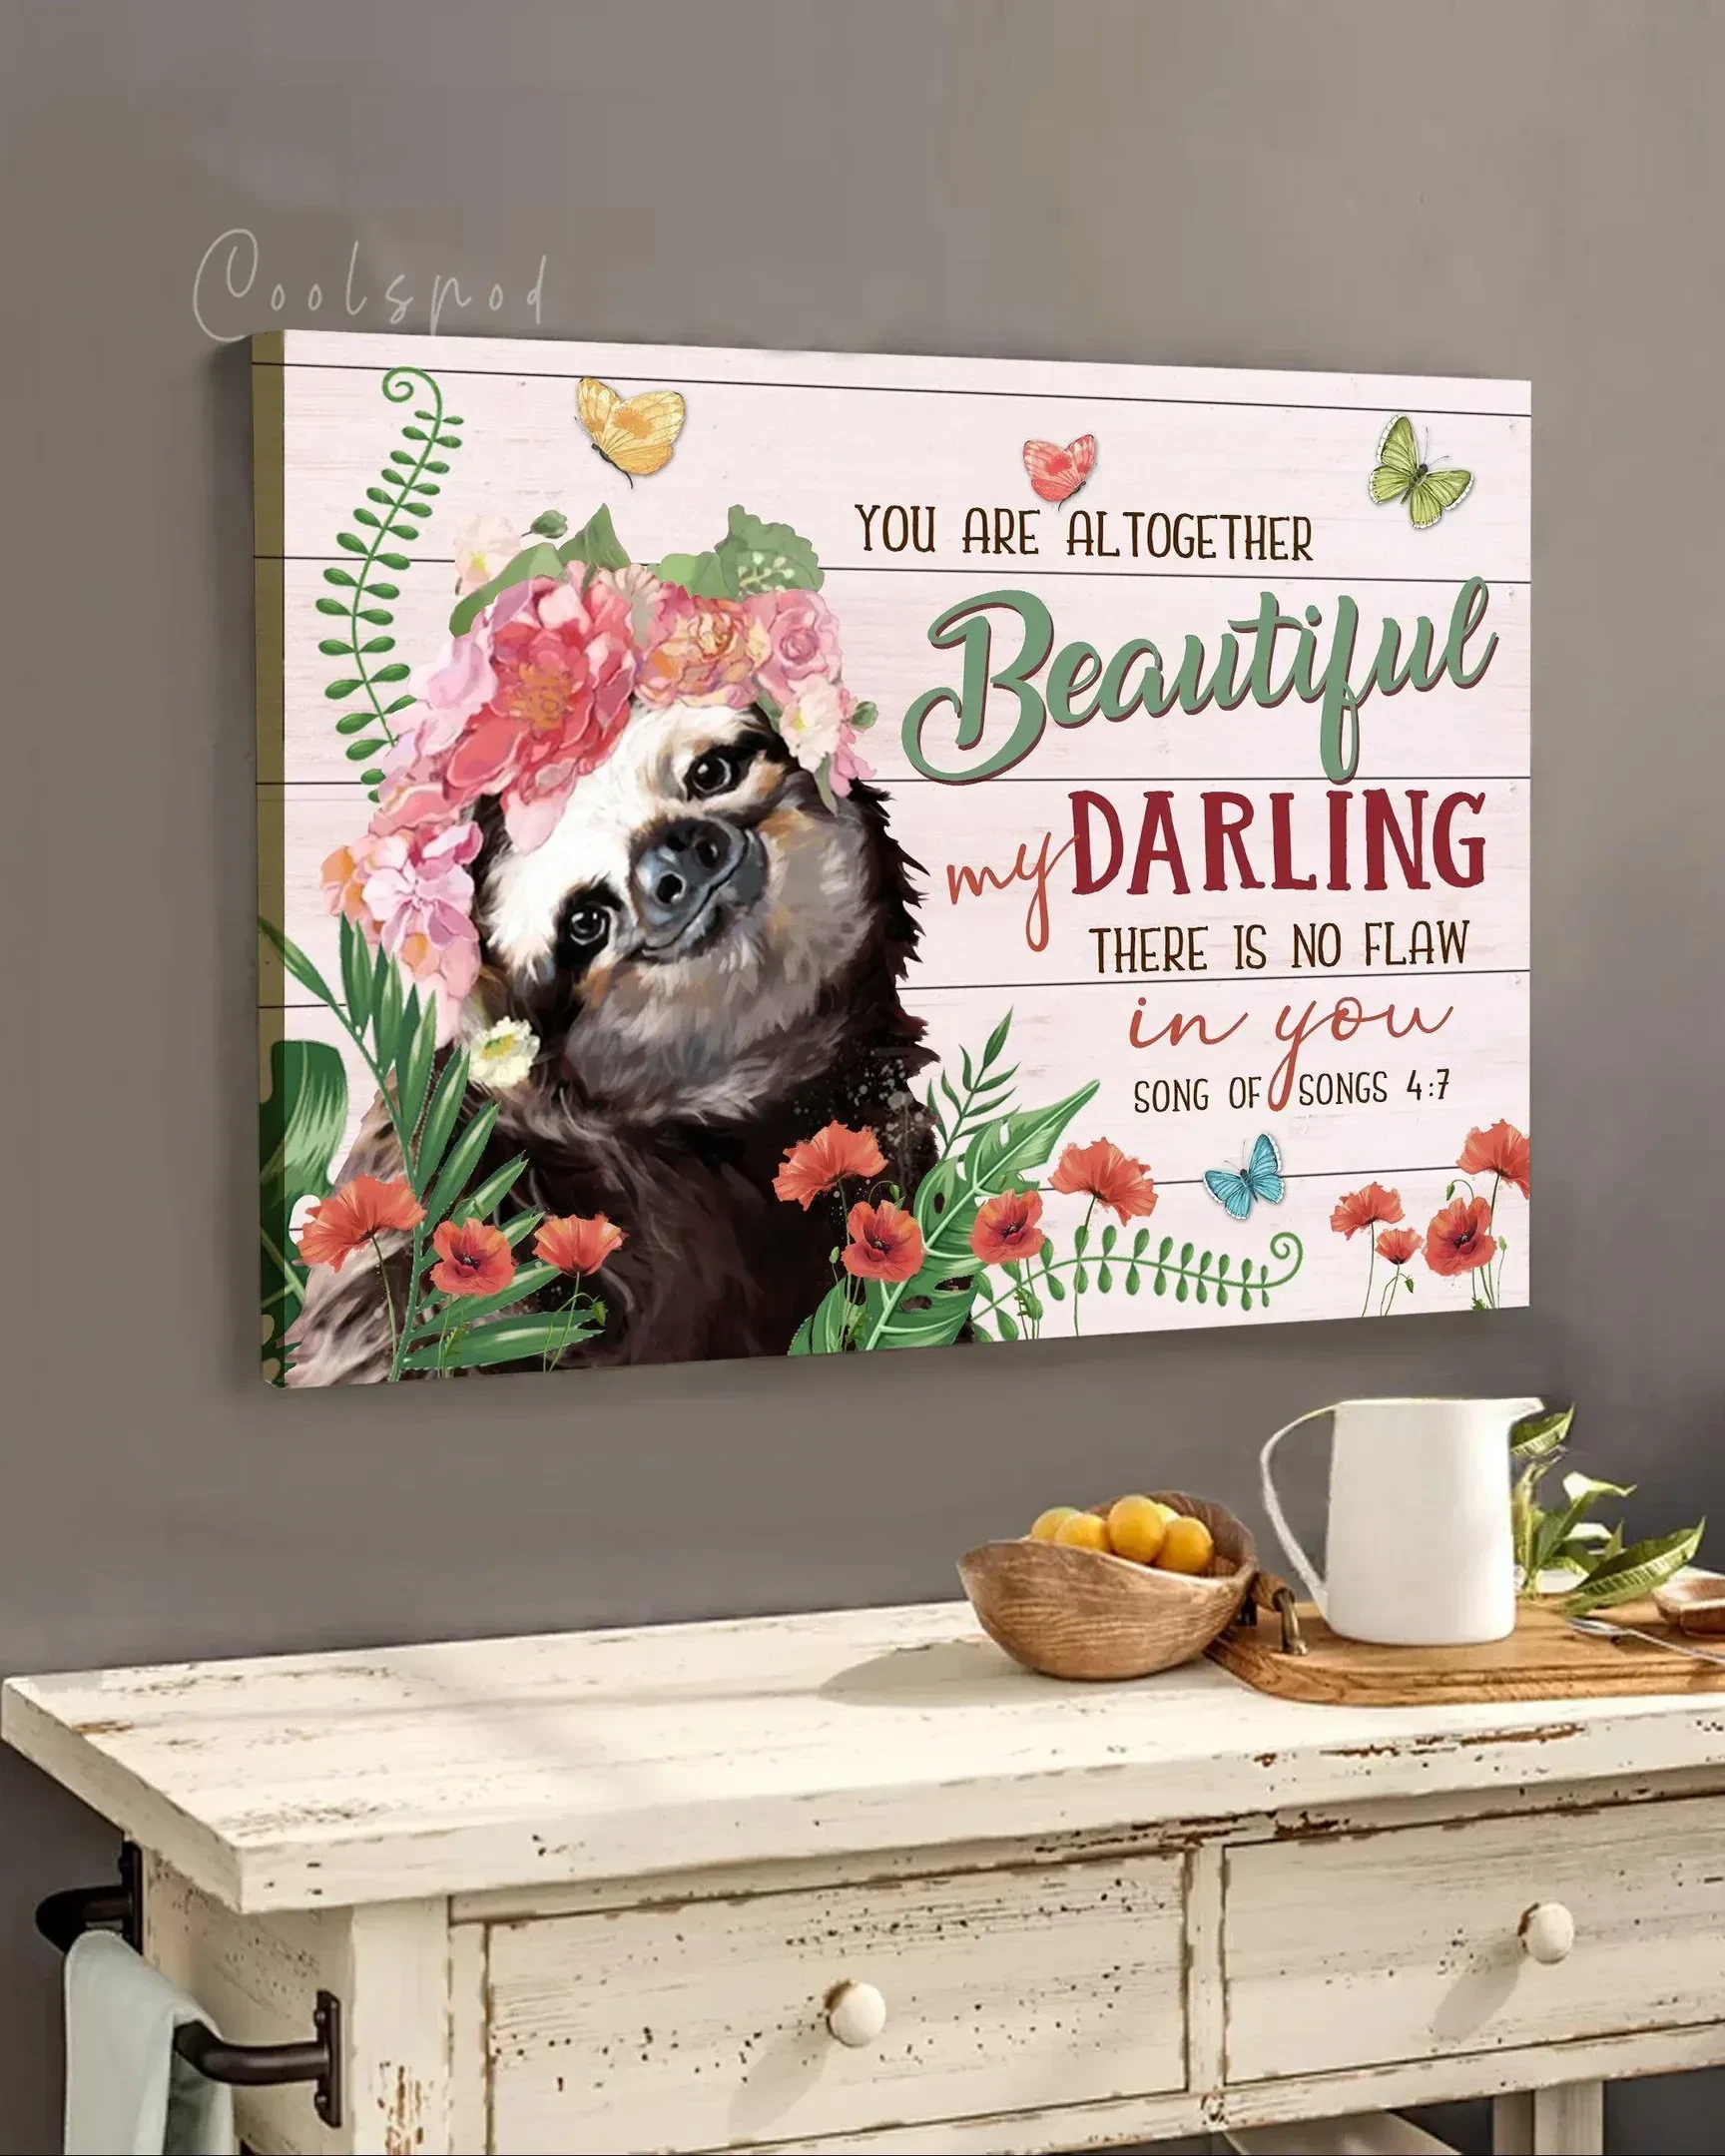 Hippie Wall Art Canvas - Sloth You Are Altogether Beautiful